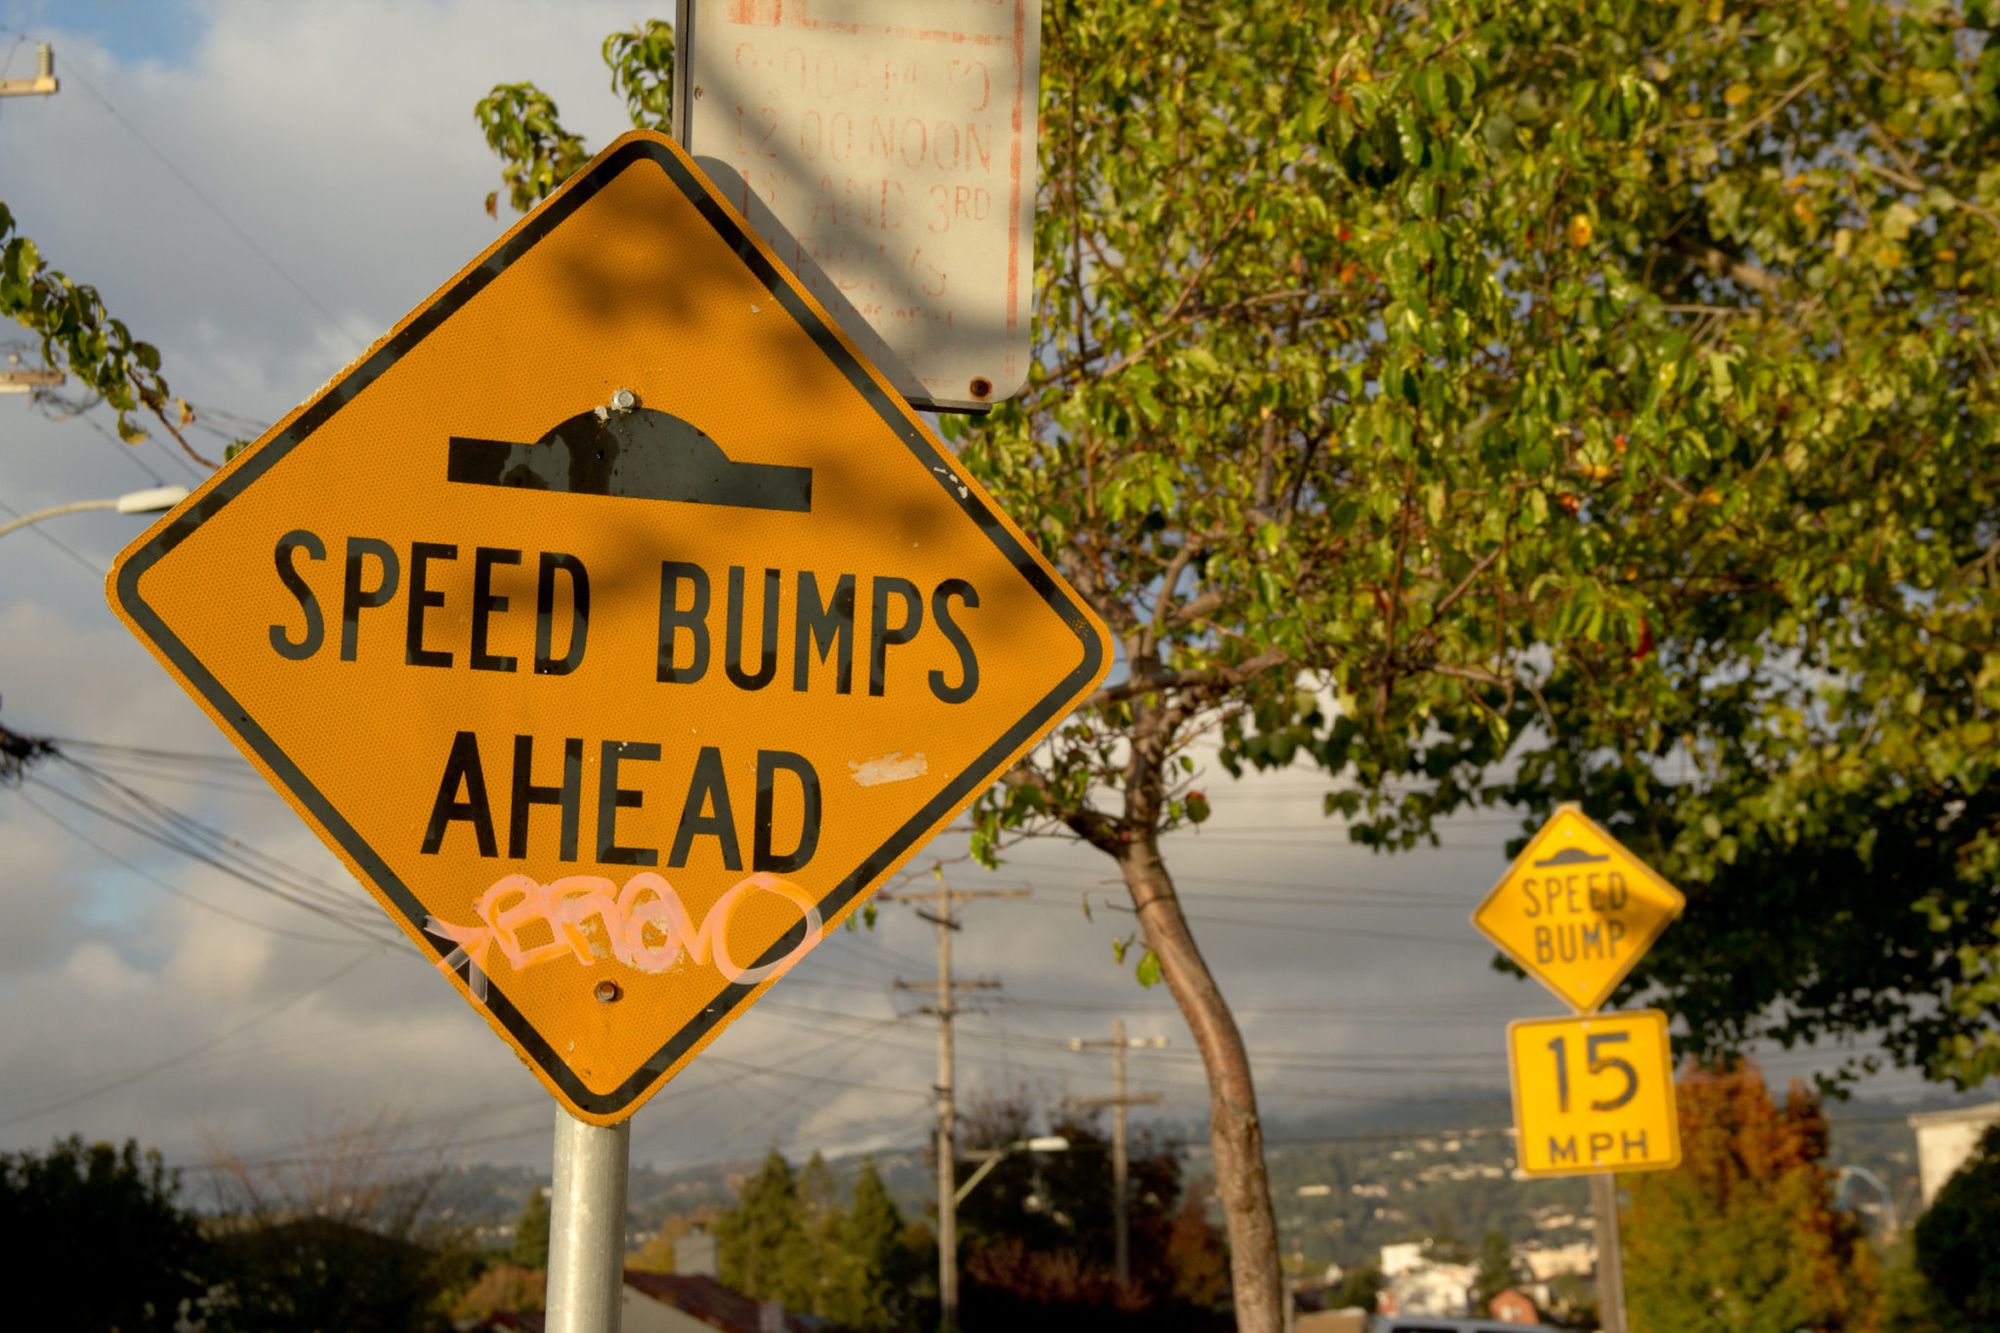 Additional Speed Bumps Slated For 21st Ave, Says Greenfield